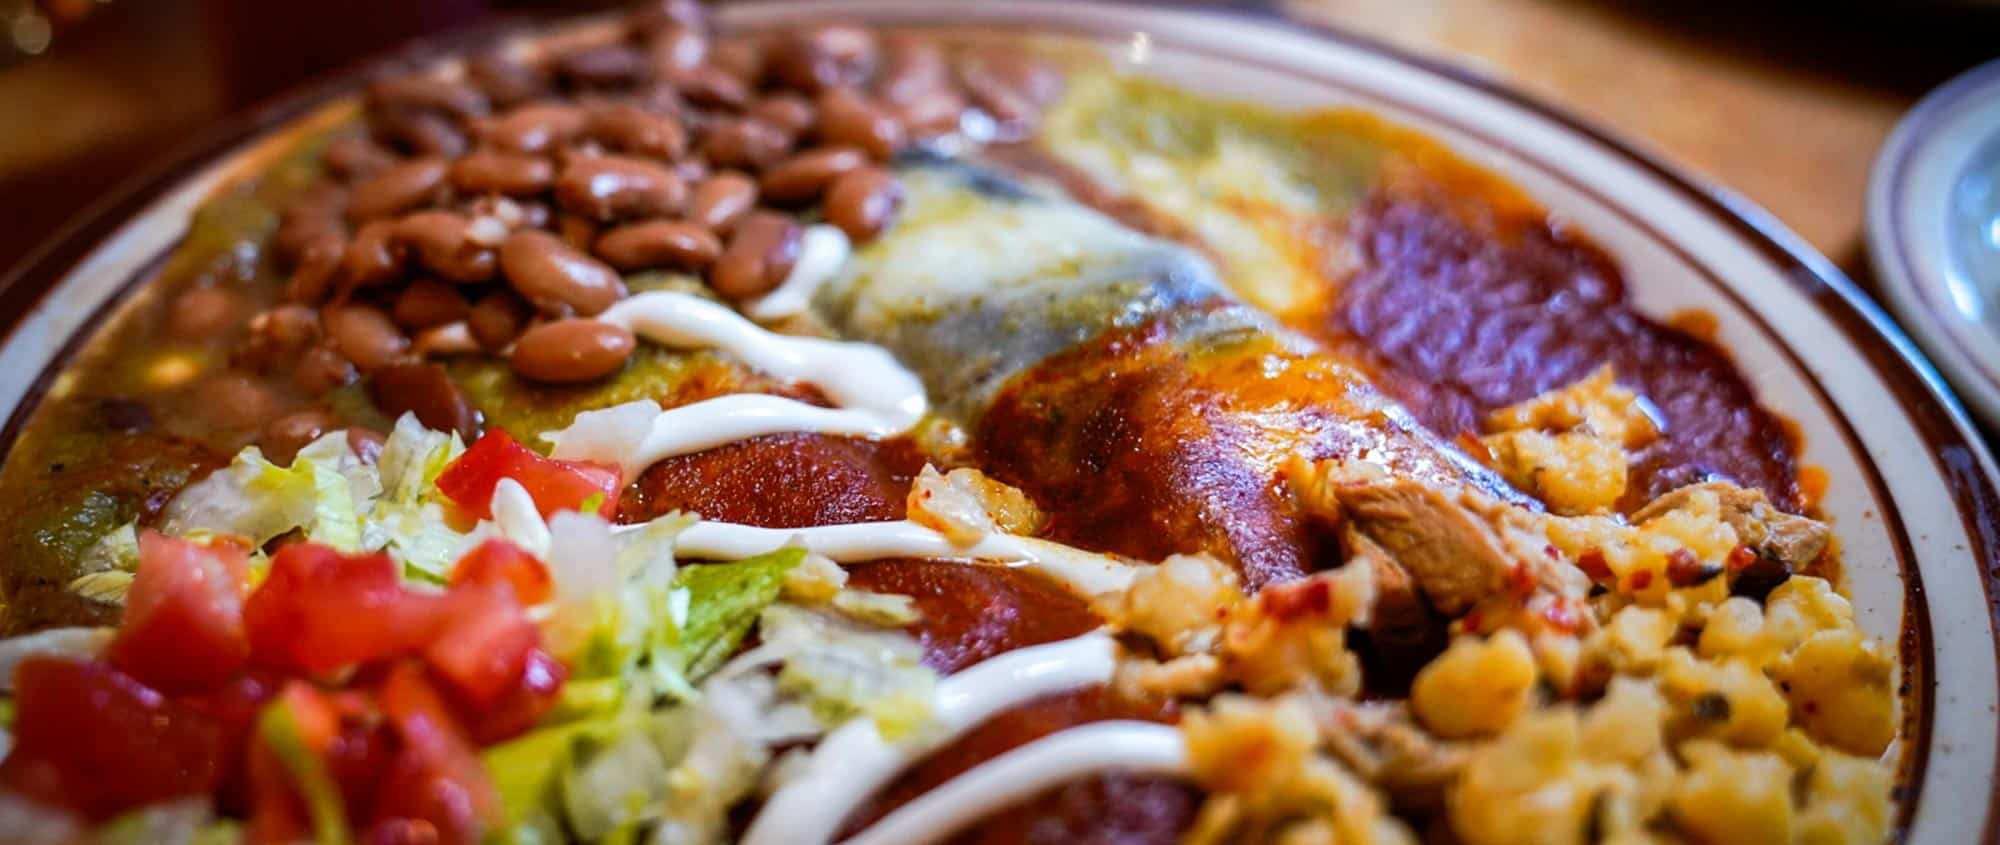 A detail of a plate of New Mexican food featuring red and green chile, pinto beans, and posole.